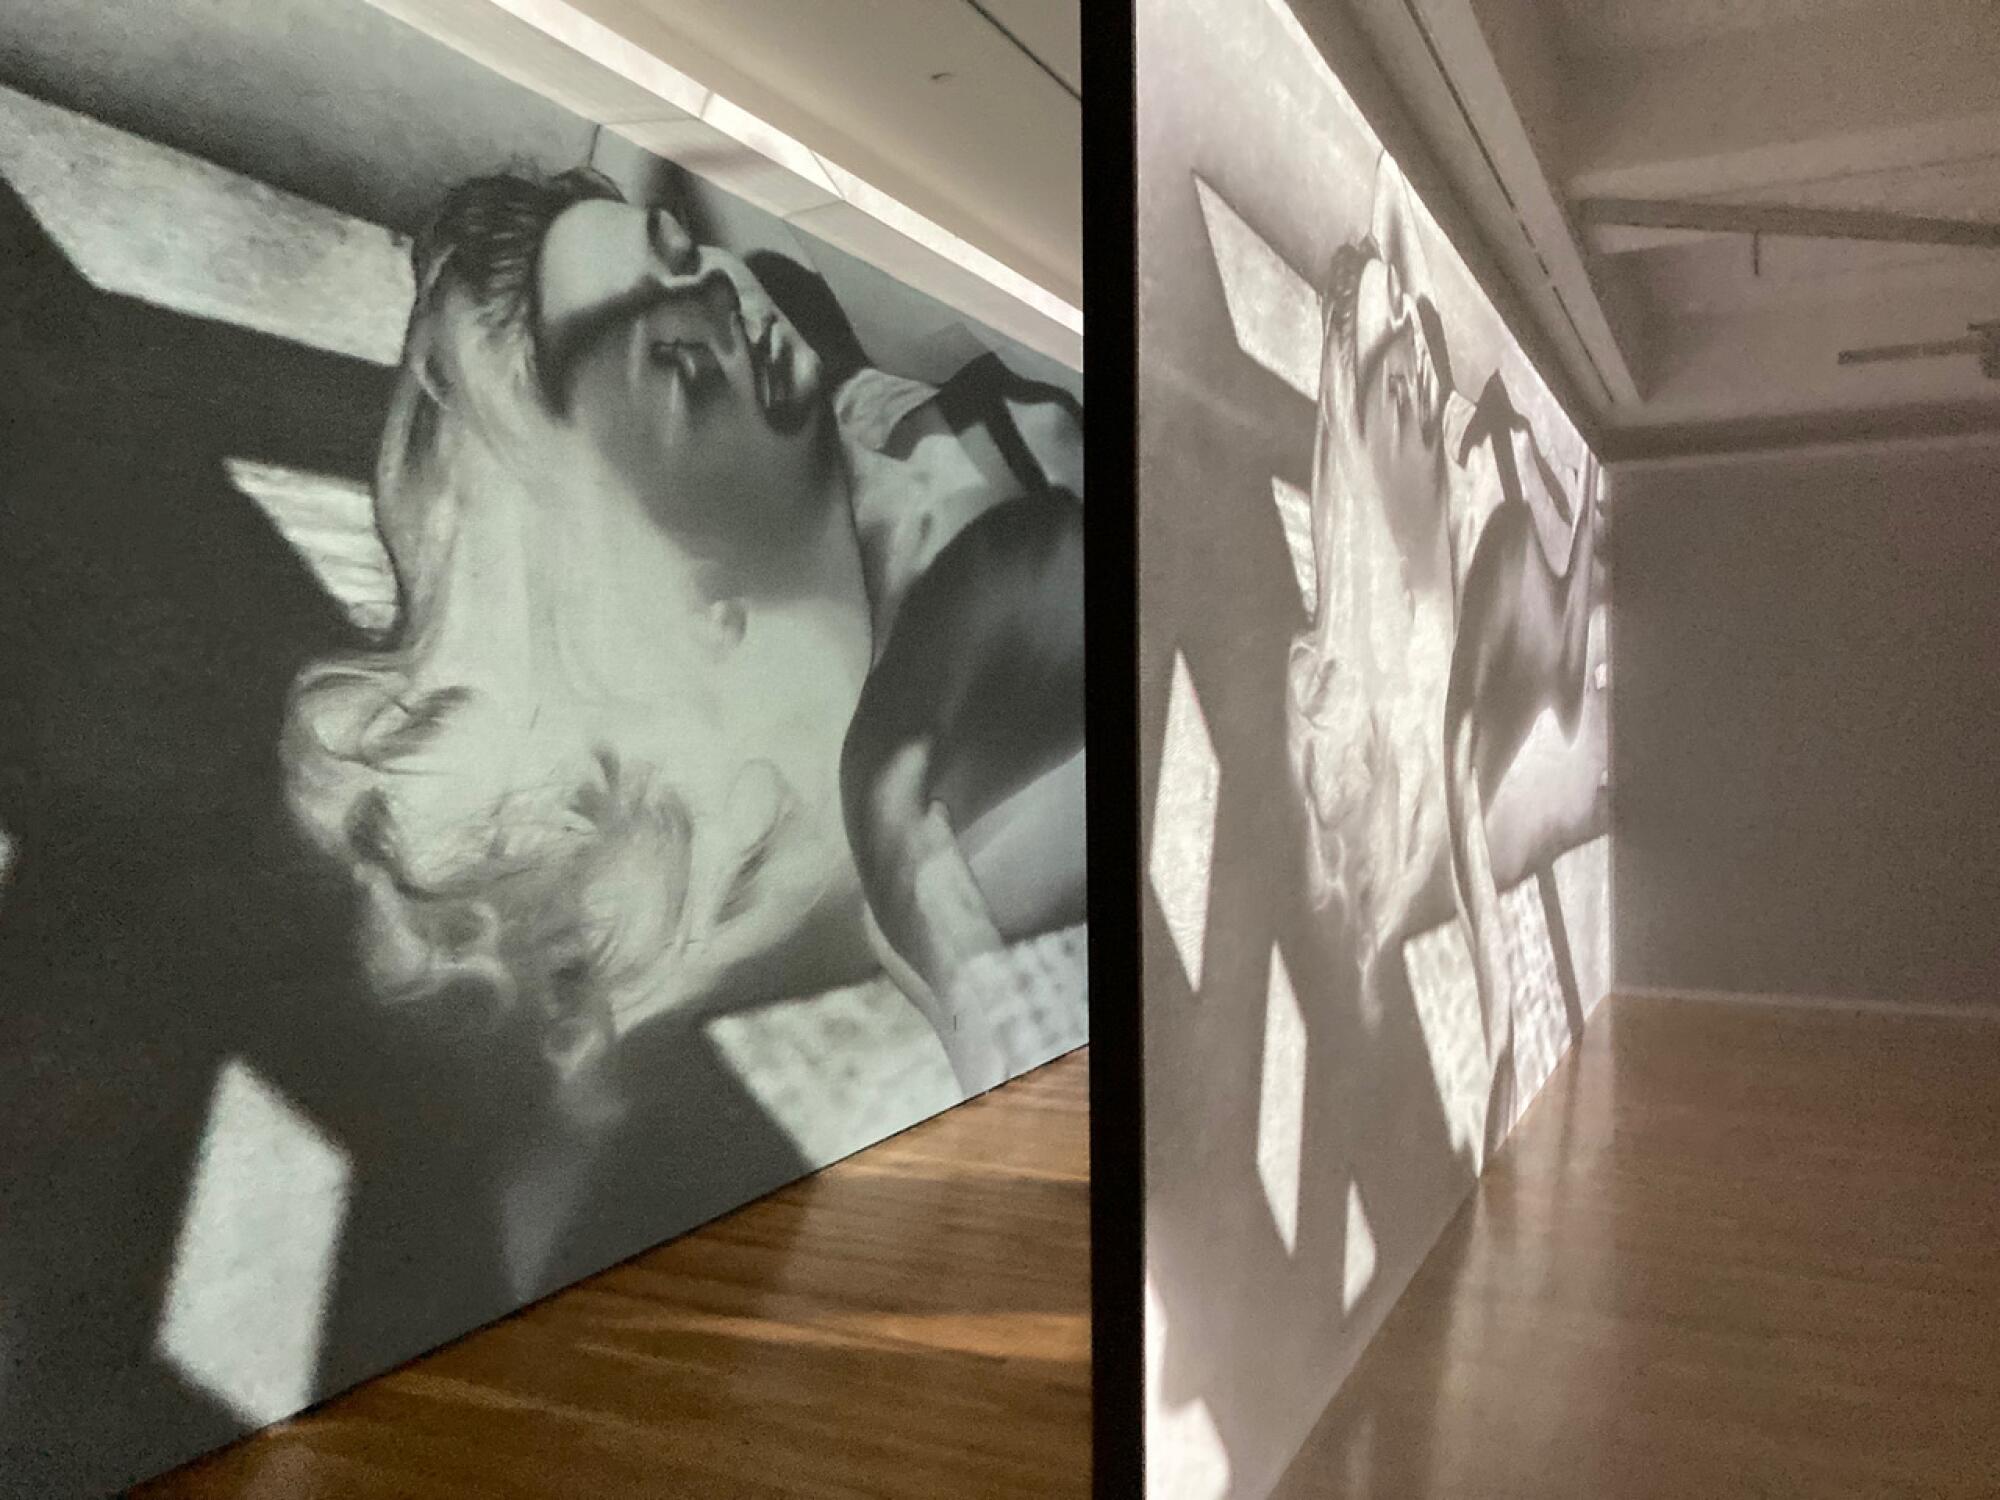 A pair of screens show a digital projection of a negative image of a beautiful woman lying on the ground.